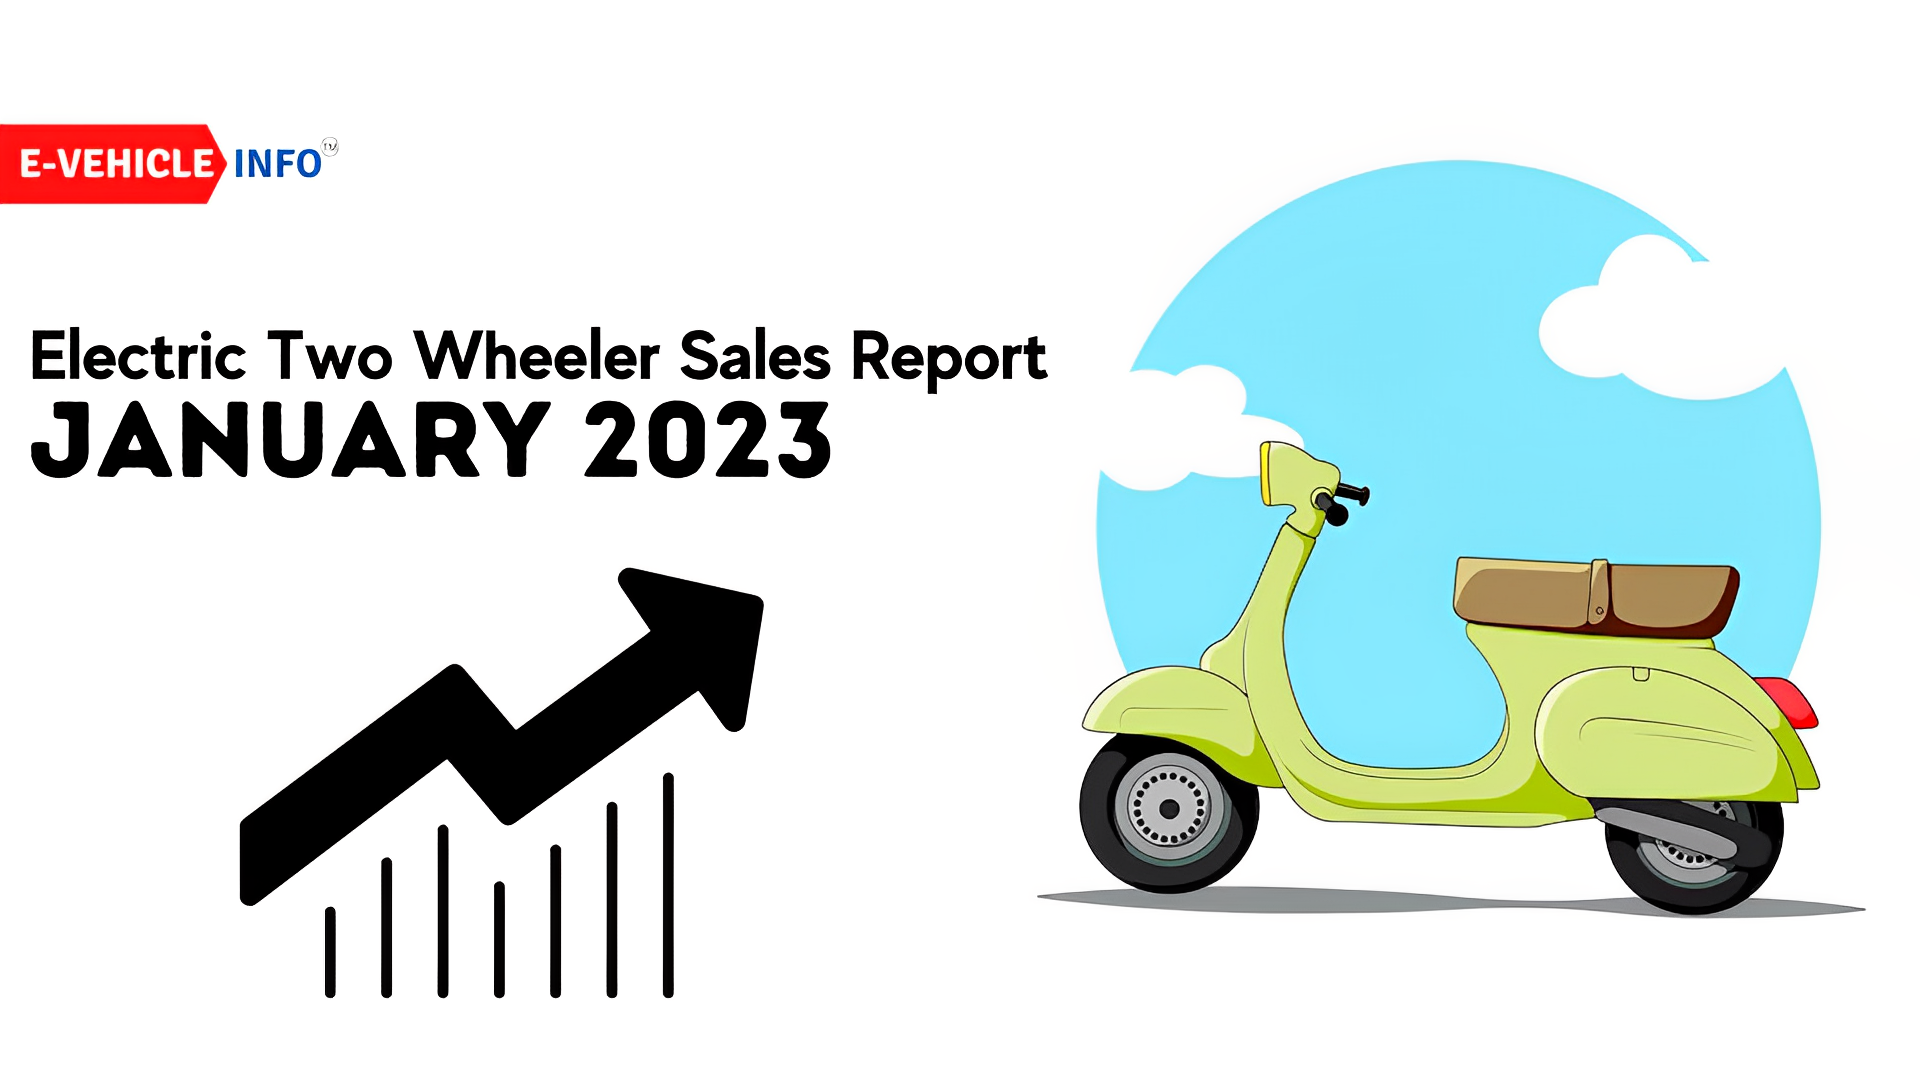 Electric Two Wheeler Sales Report: January 2023